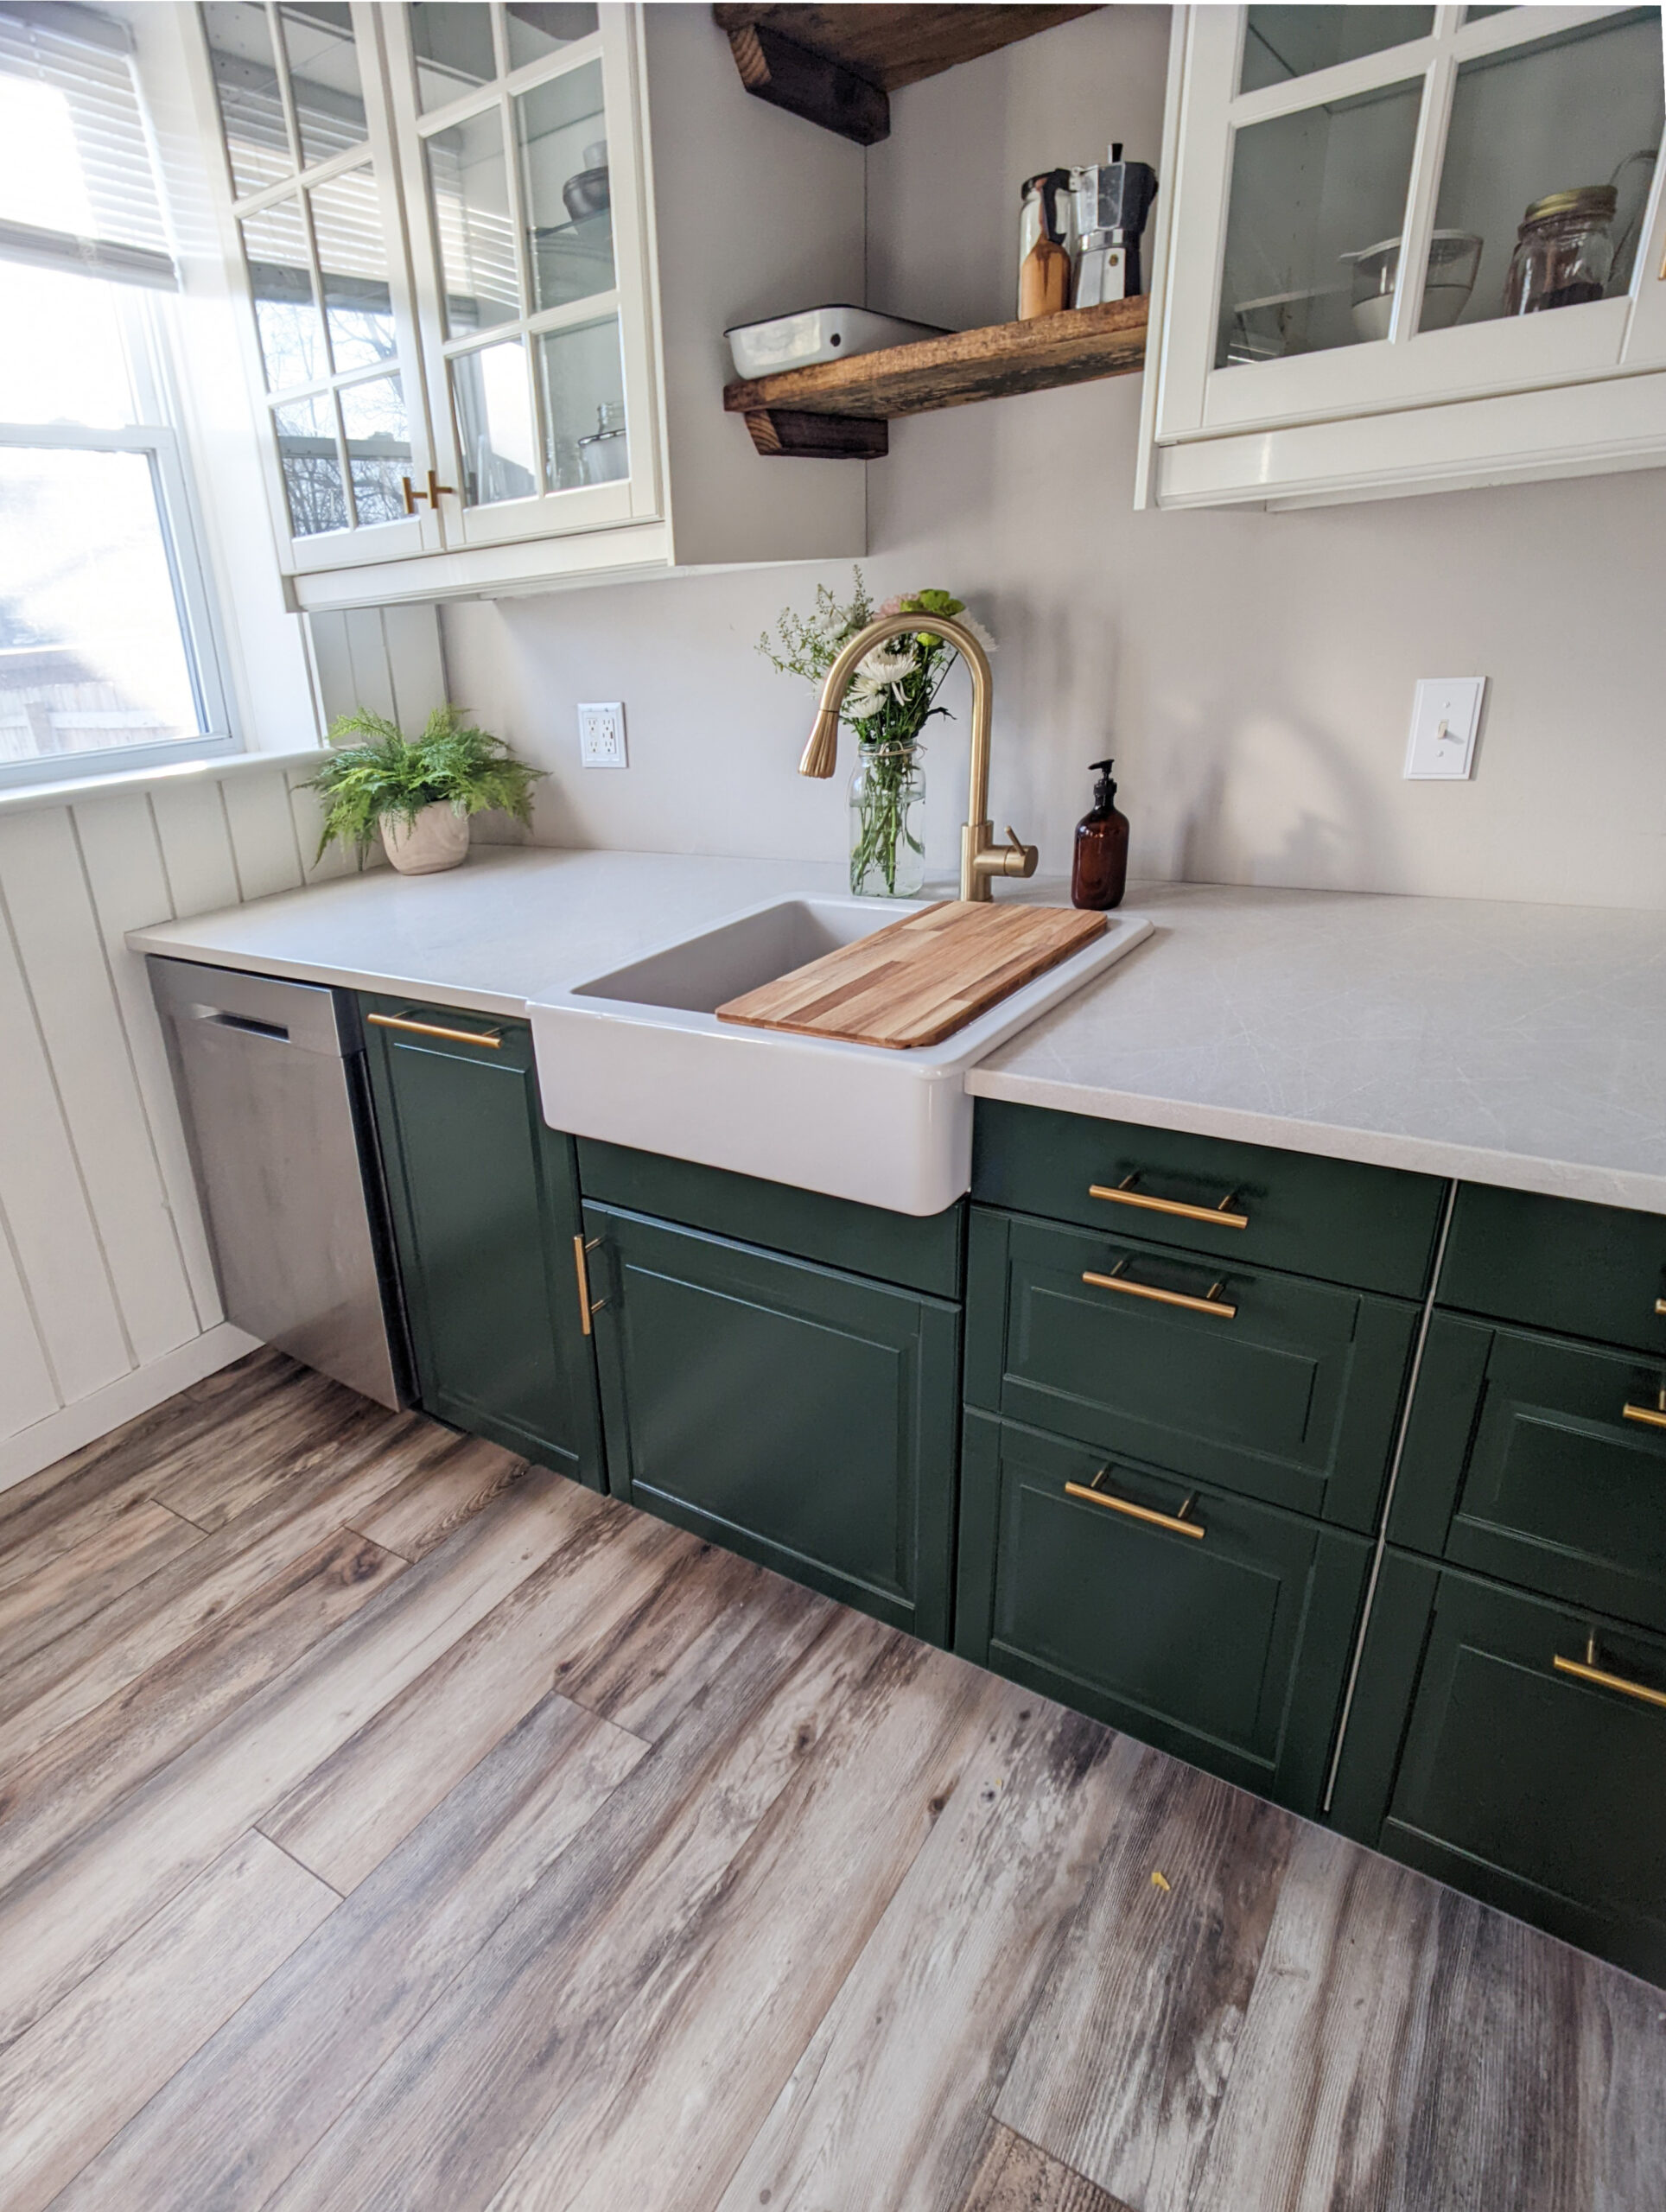 A small galley kitchen featuring open shelving, glass front cabinets, and green base cabinets.